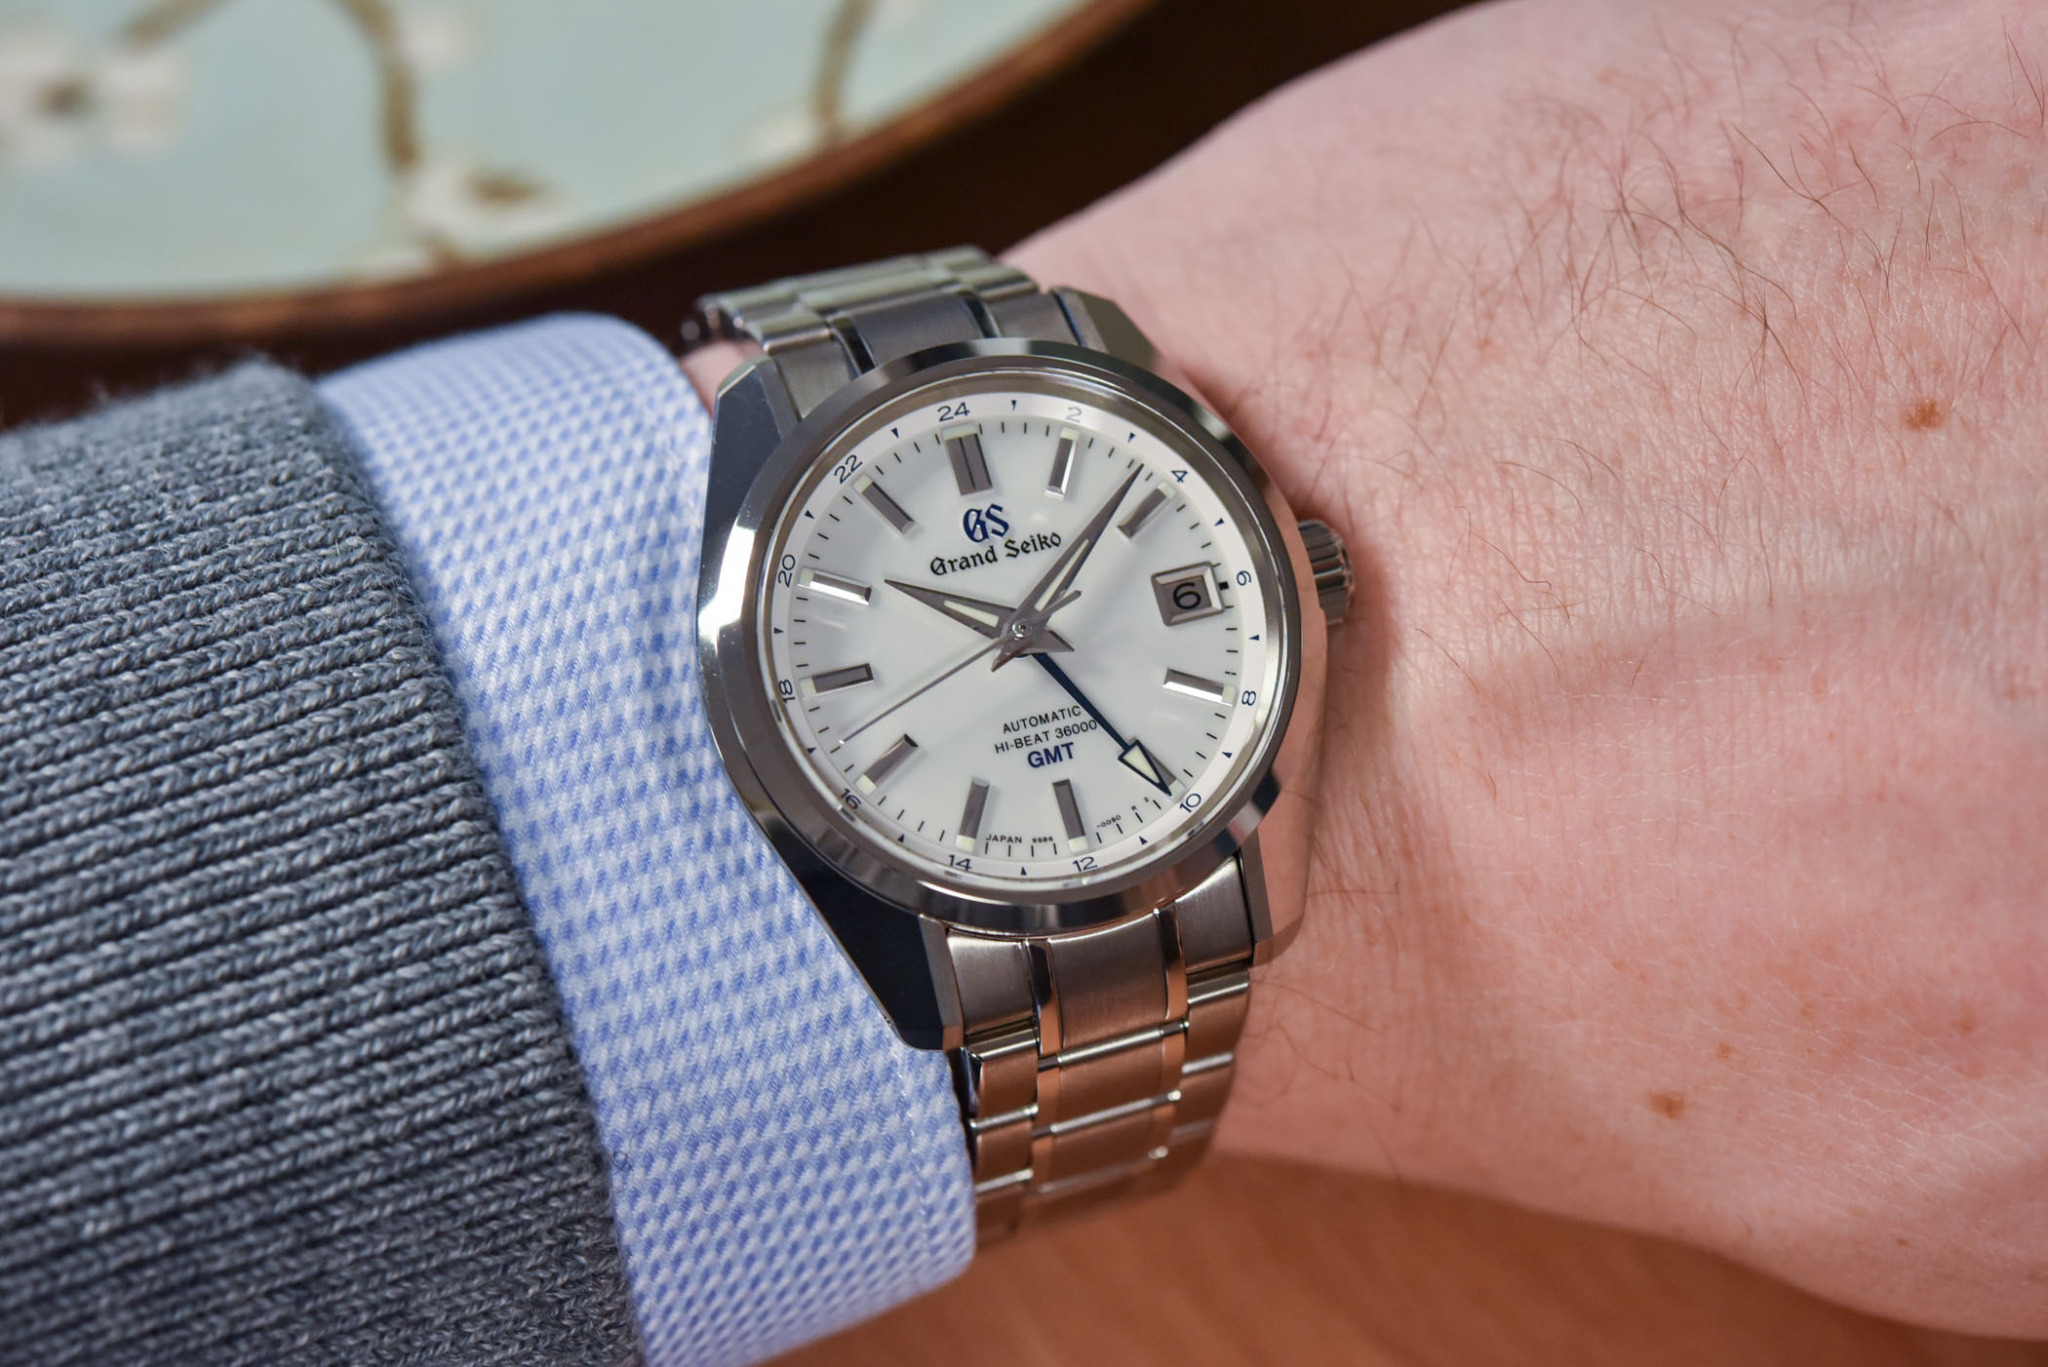 Grand-Seiko-Heritage-Collection-Hi-Beat-36000-GMT-44GS-55th-Anniversary - WATCHLOUNGE